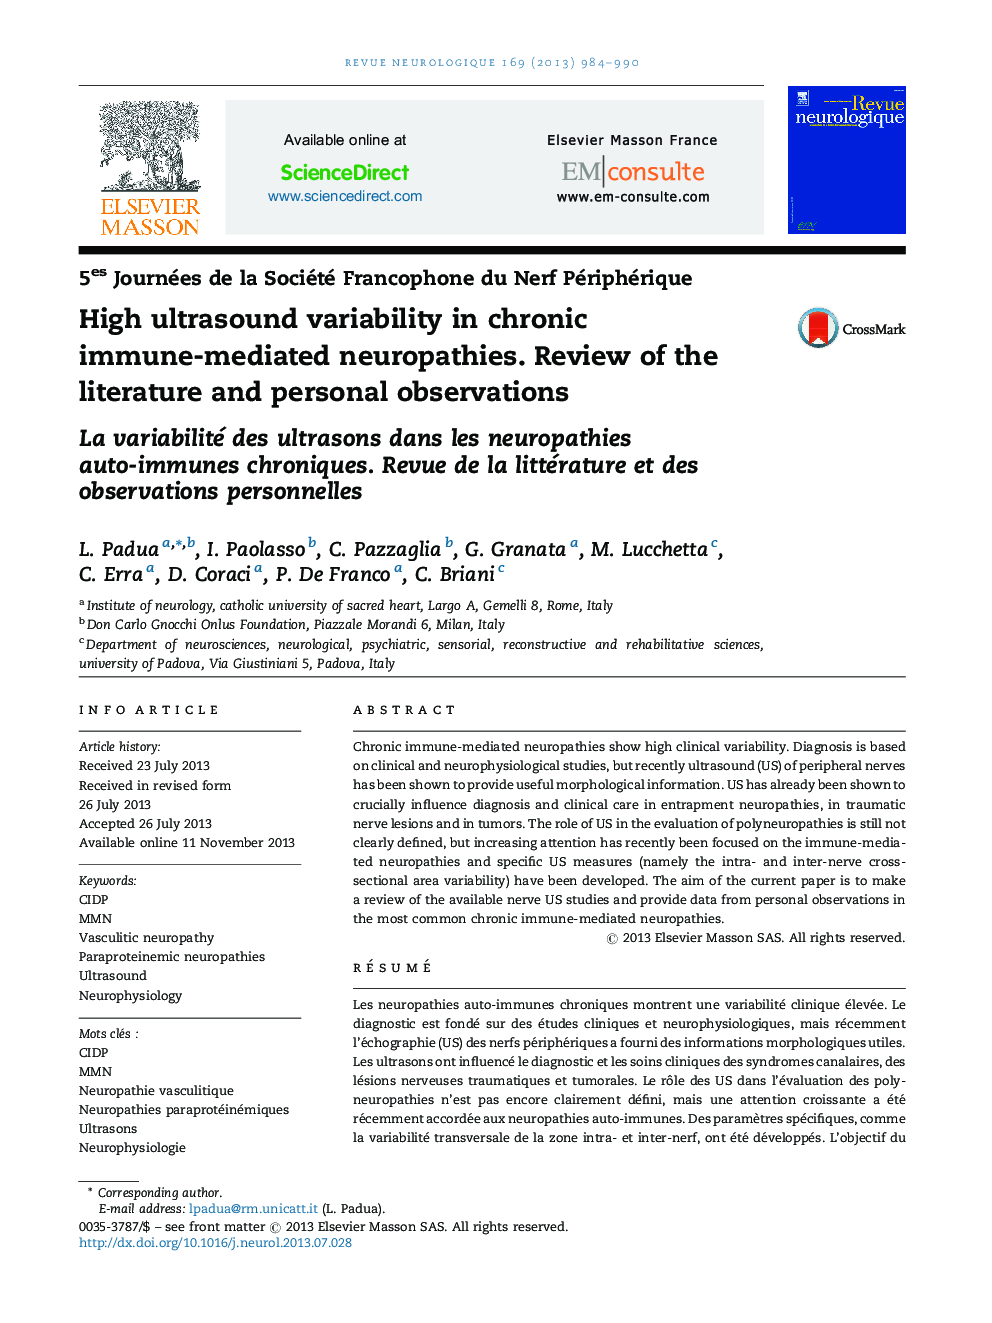 High ultrasound variability in chronic immune-mediated neuropathies. Review of the literature and personal observations